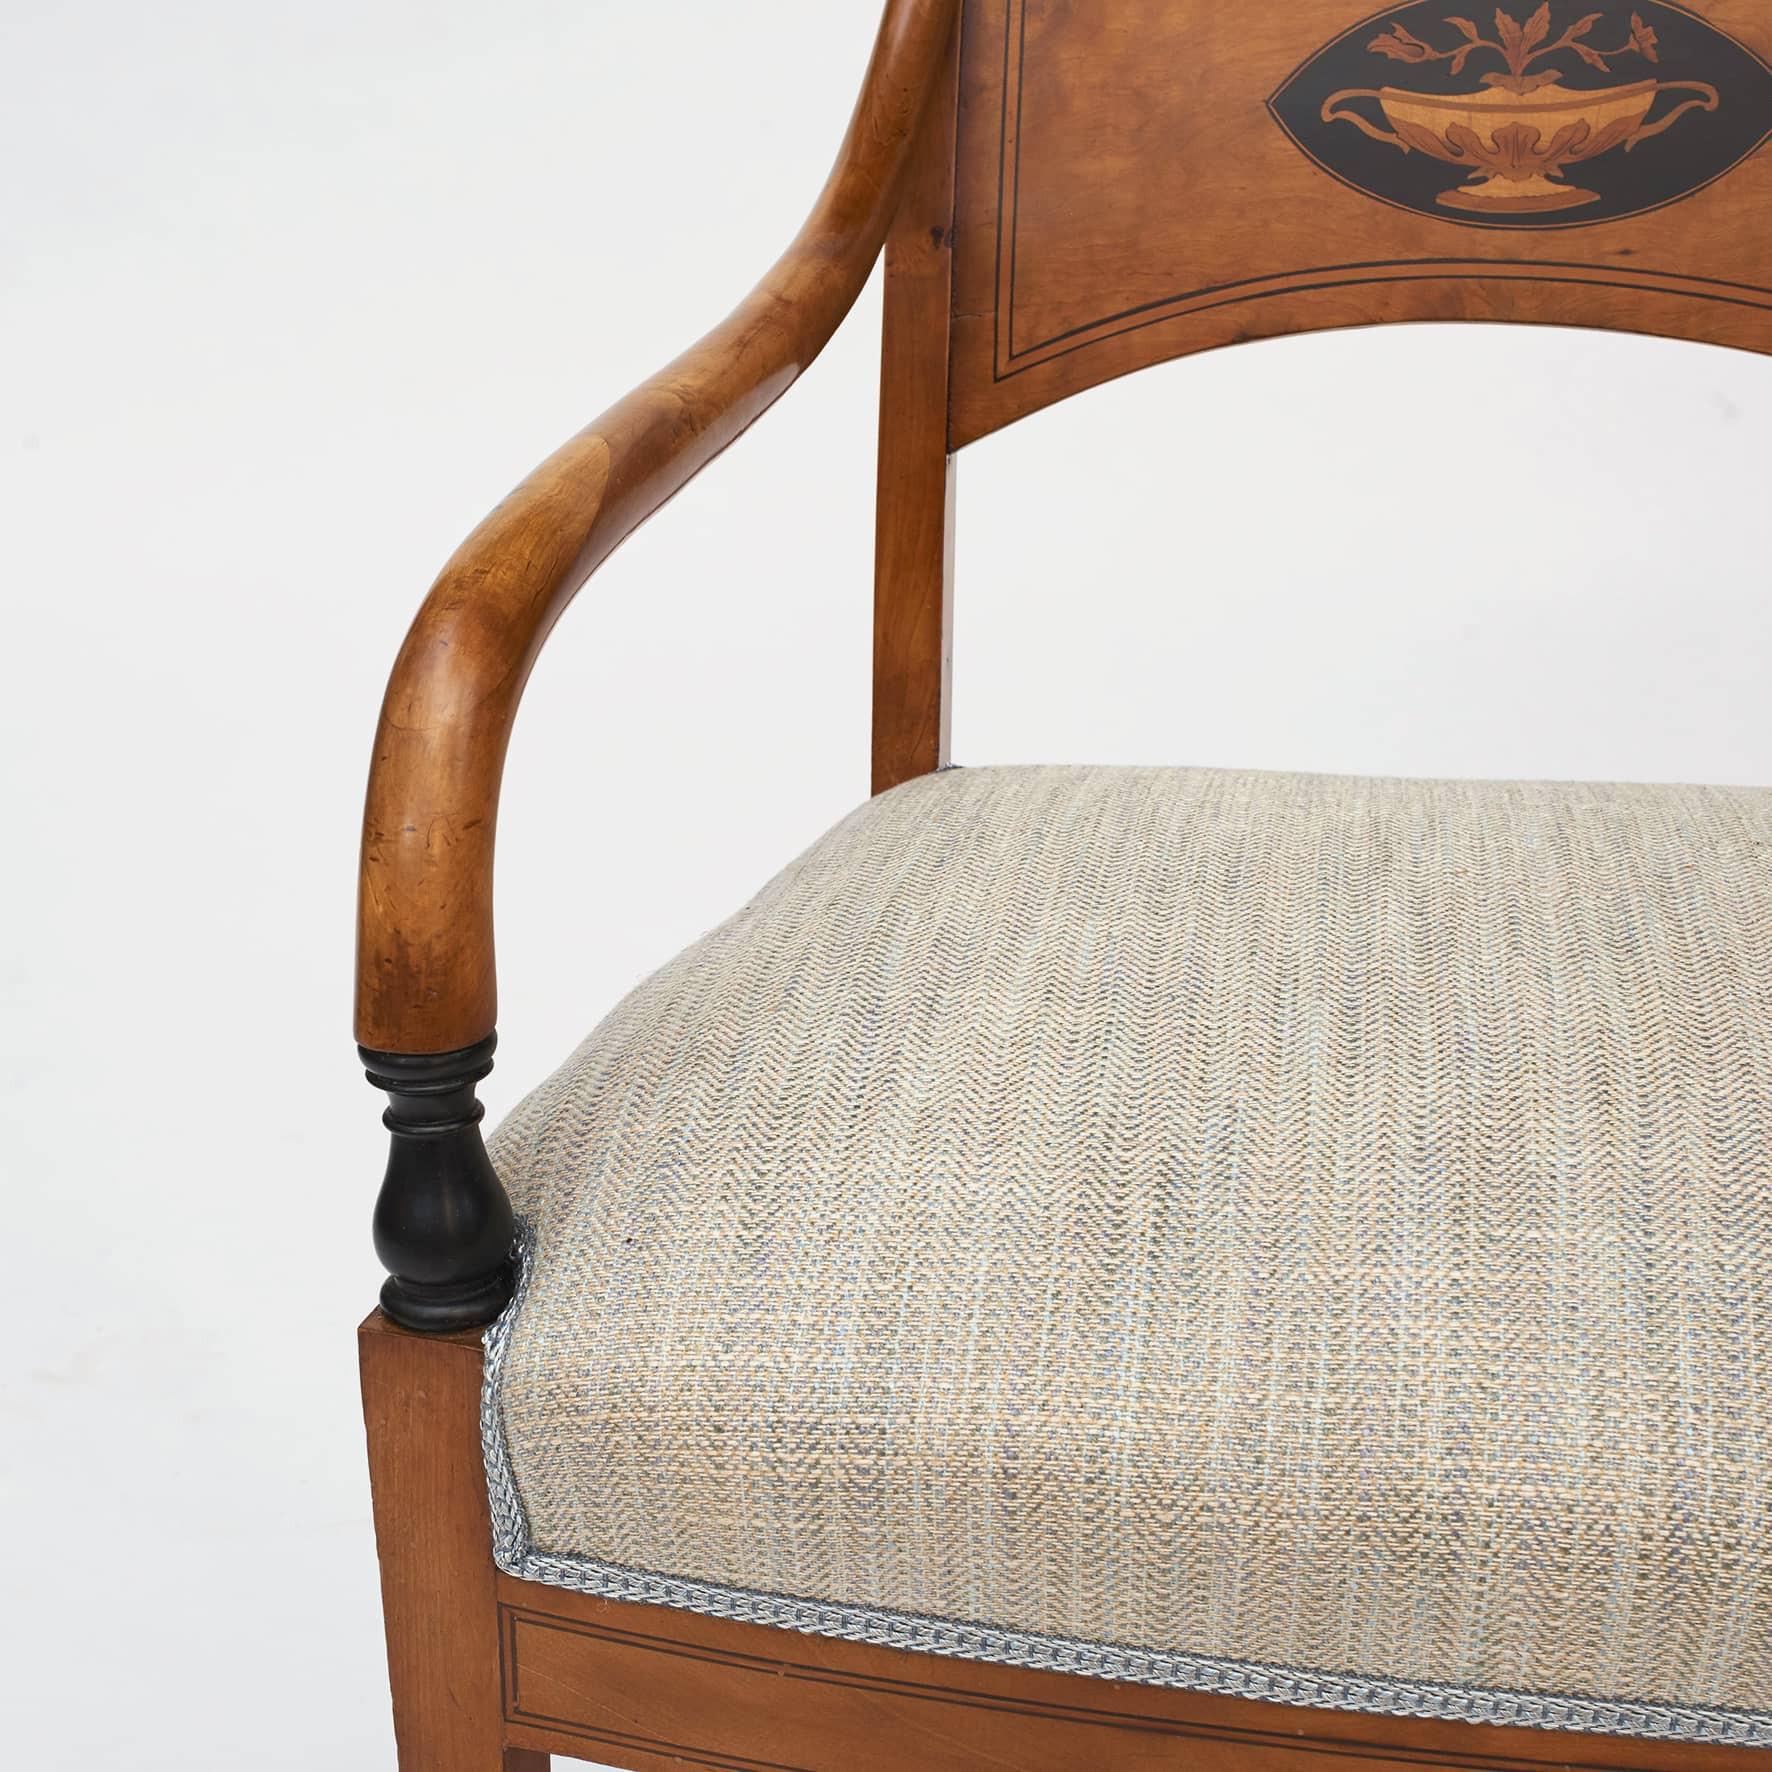 Pair of Danish Late Empire Birch Armchairs With Inlay, 1810-1820 For Sale 1